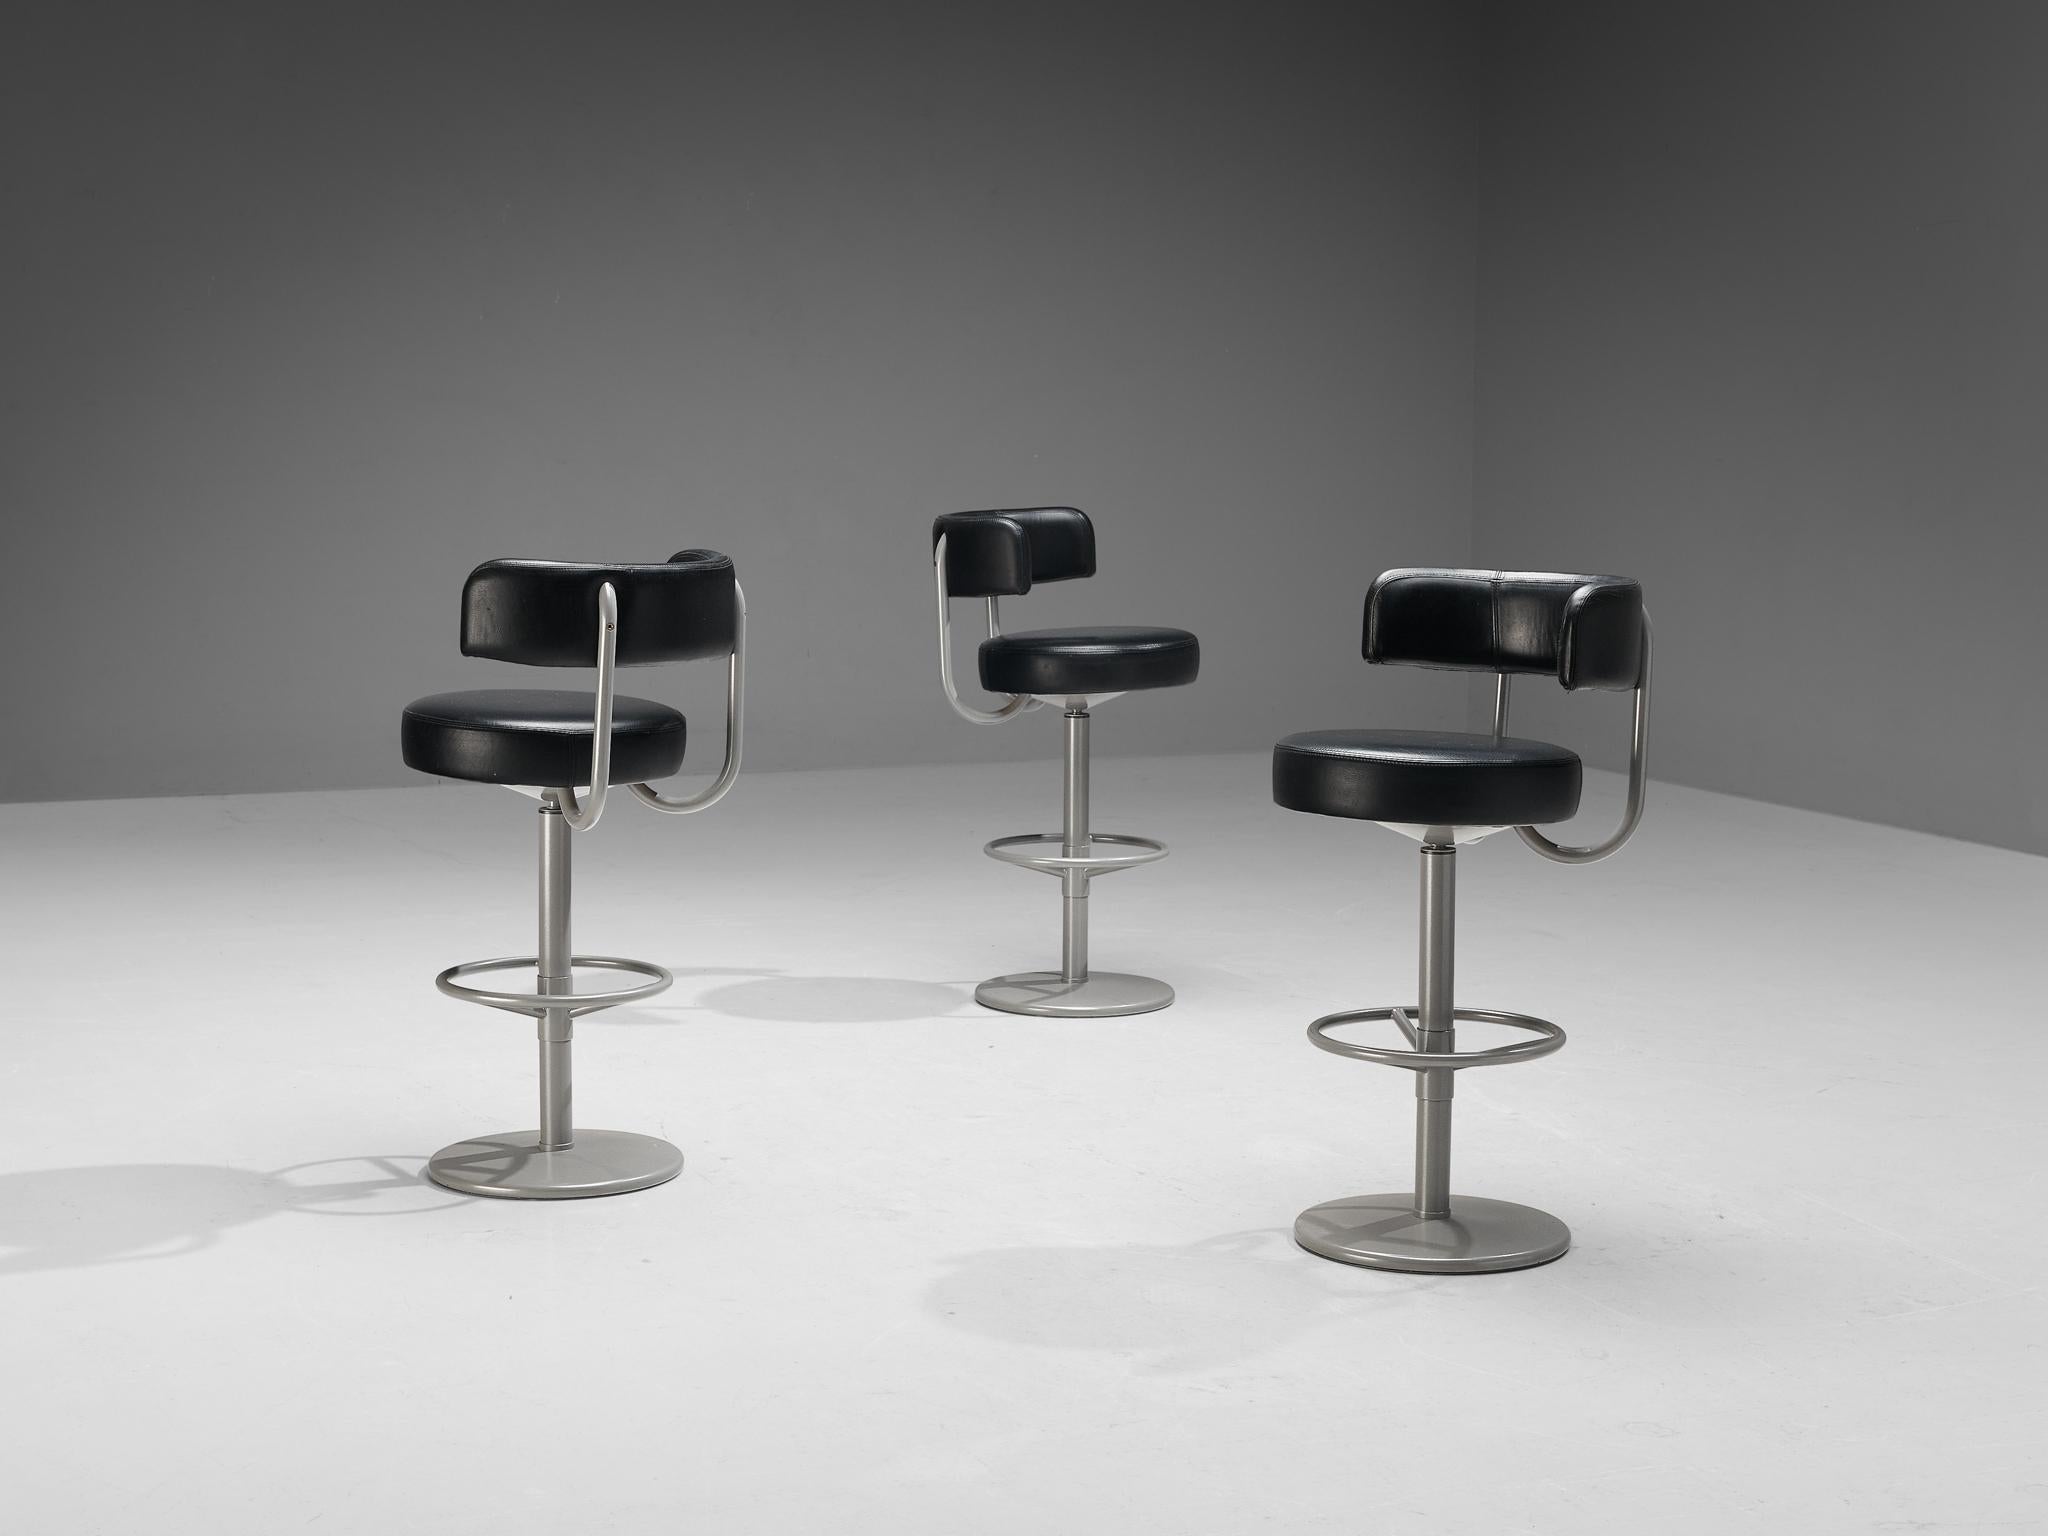 Börje Johanson for Johanson Design, set of three barstools as part of 'Johanson Jupiter Collection', metal, leatherette, Sweden, 1970s.

Highly comfortable high barstools in black leatherette upholstery. Due to the solid seat and back, these